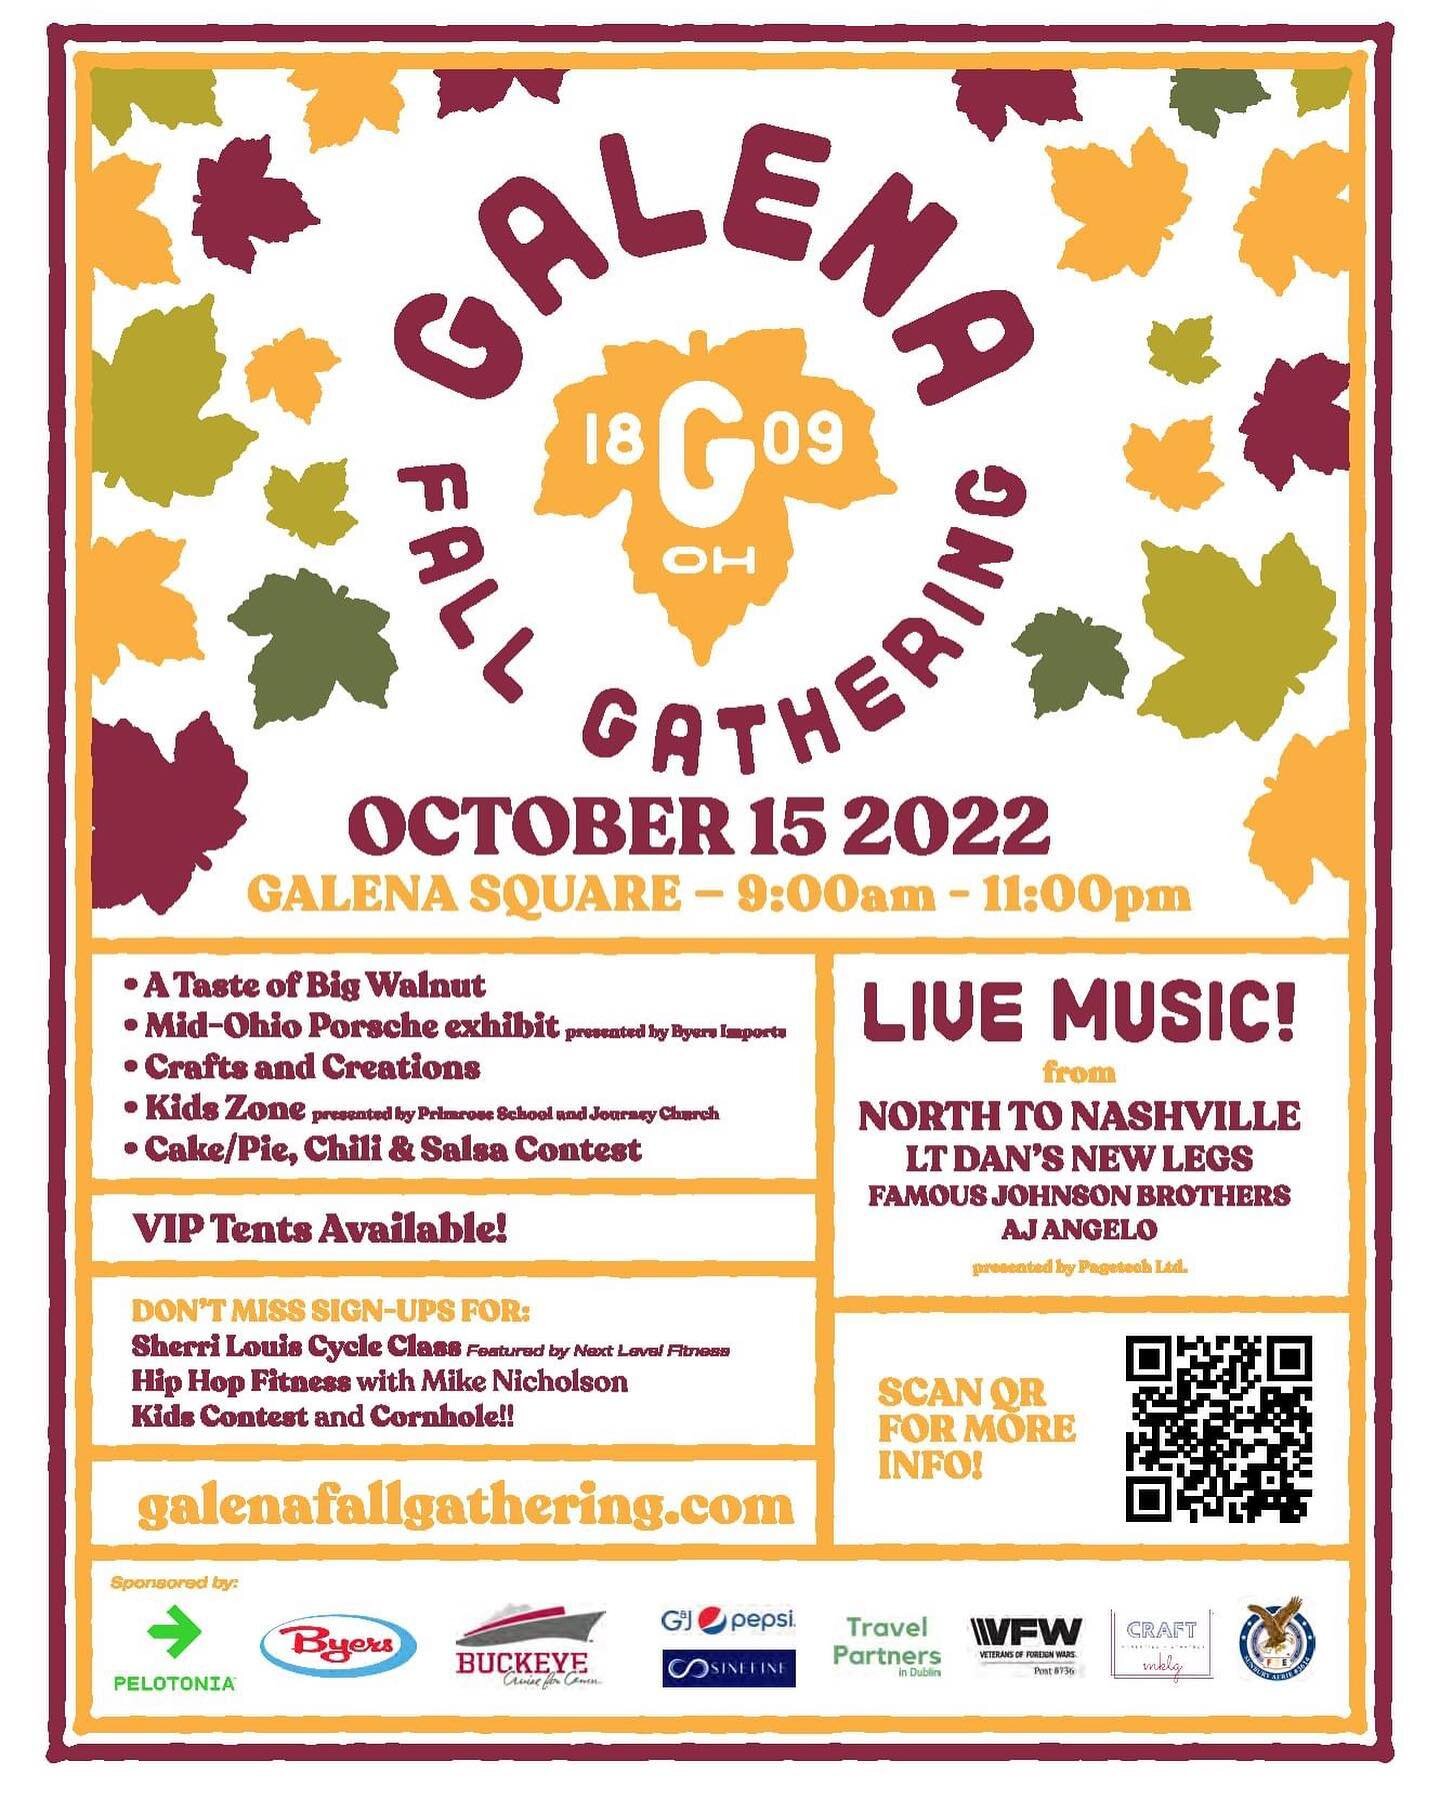 🍂55 DAYS UNTIL THE GALENA FALL GATHERING 🍂

We still have opportunities to participate!

Sign up for:
 🍂Be A Sponsor
 🥄Cooking Contest
 🚲Workout Sessions
👜 Vendors
 💰Cornhole

To learn more about everything the festival has to offer visit our 